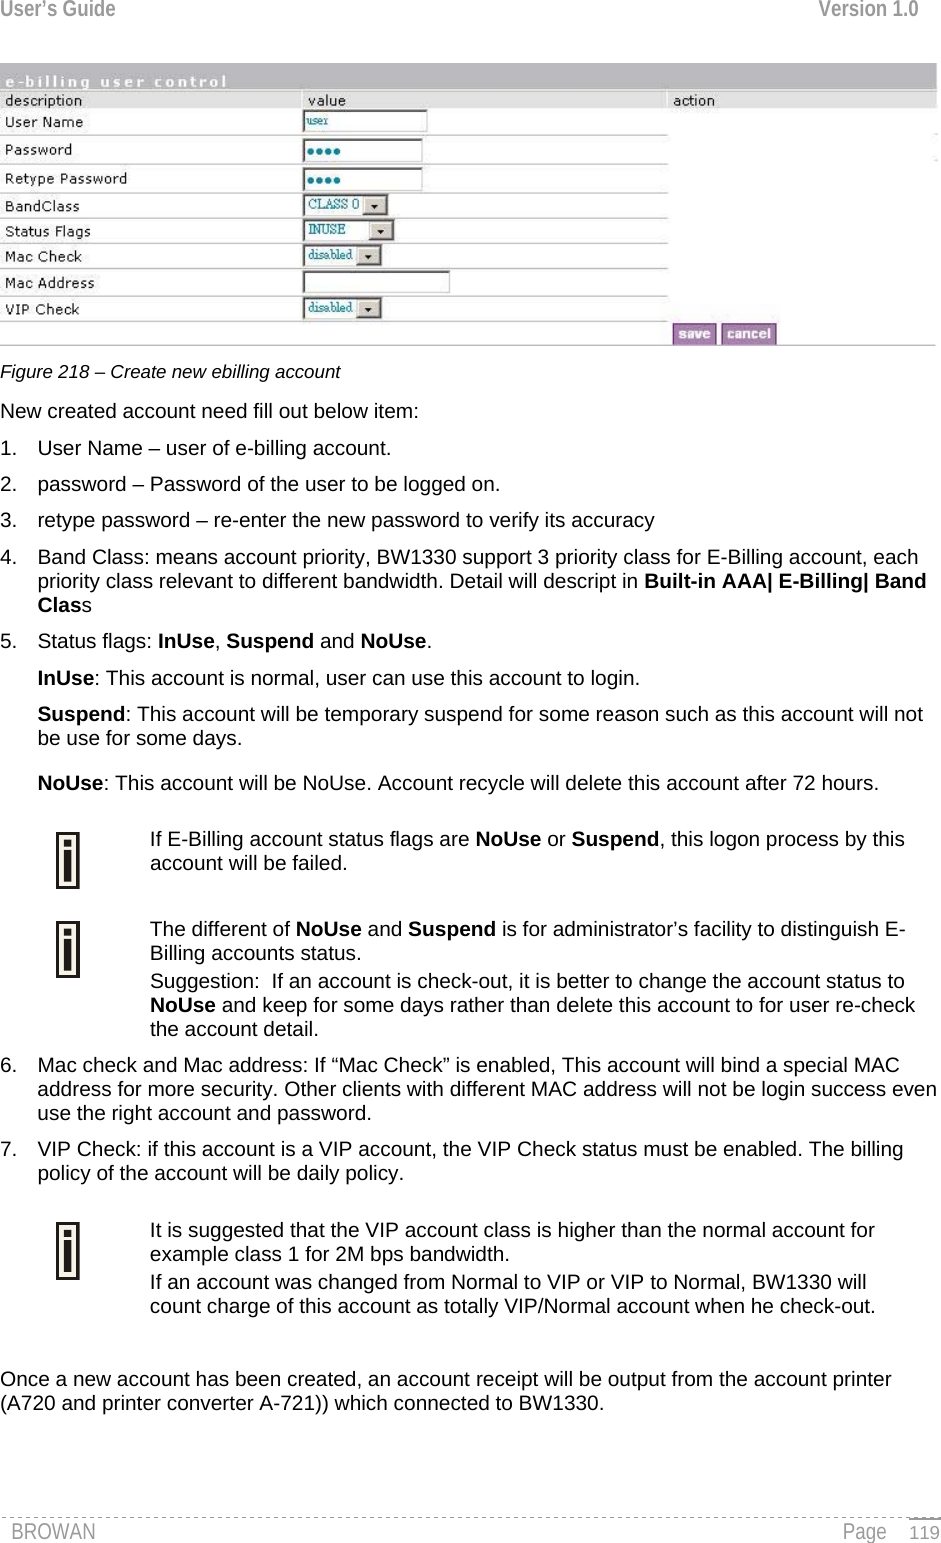 User’s Guide  Version 1.0   Figure 218 – Create new ebilling account New created account need fill out below item: 1.  User Name – user of e-billing account. 2.  password – Password of the user to be logged on. 3.  retype password – re-enter the new password to verify its accuracy 4.  Band Class: means account priority, BW1330 support 3 priority class for E-Billing account, each priority class relevant to different bandwidth. Detail will descript in Built-in AAA| E-Billing| Band Class 5. Status flags: InUse, Suspend and NoUse. InUse: This account is normal, user can use this account to login. Suspend: This account will be temporary suspend for some reason such as this account will not be use for some days. NoUse: This account will be NoUse. Account recycle will delete this account after 72 hours. If E-Billing account status flags are NoUse or Suspend, this logon process by this account will be failed.  The different of NoUse and Suspend is for administrator’s facility to distinguish E-Billing accounts status.  Suggestion:  If an account is check-out, it is better to change the account status to NoUse and keep for some days rather than delete this account to for user re-check the account detail. 6.  Mac check and Mac address: If “Mac Check” is enabled, This account will bind a special MAC address for more security. Other clients with different MAC address will not be login success even use the right account and password. 7.  VIP Check: if this account is a VIP account, the VIP Check status must be enabled. The billing policy of the account will be daily policy. It is suggested that the VIP account class is higher than the normal account for example class 1 for 2M bps bandwidth.  If an account was changed from Normal to VIP or VIP to Normal, BW1330 will count charge of this account as totally VIP/Normal account when he check-out.  Once a new account has been created, an account receipt will be output from the account printer (A720 and printer converter A-721)) which connected to BW1330. BROWAN                                                                                                                                               Page   119